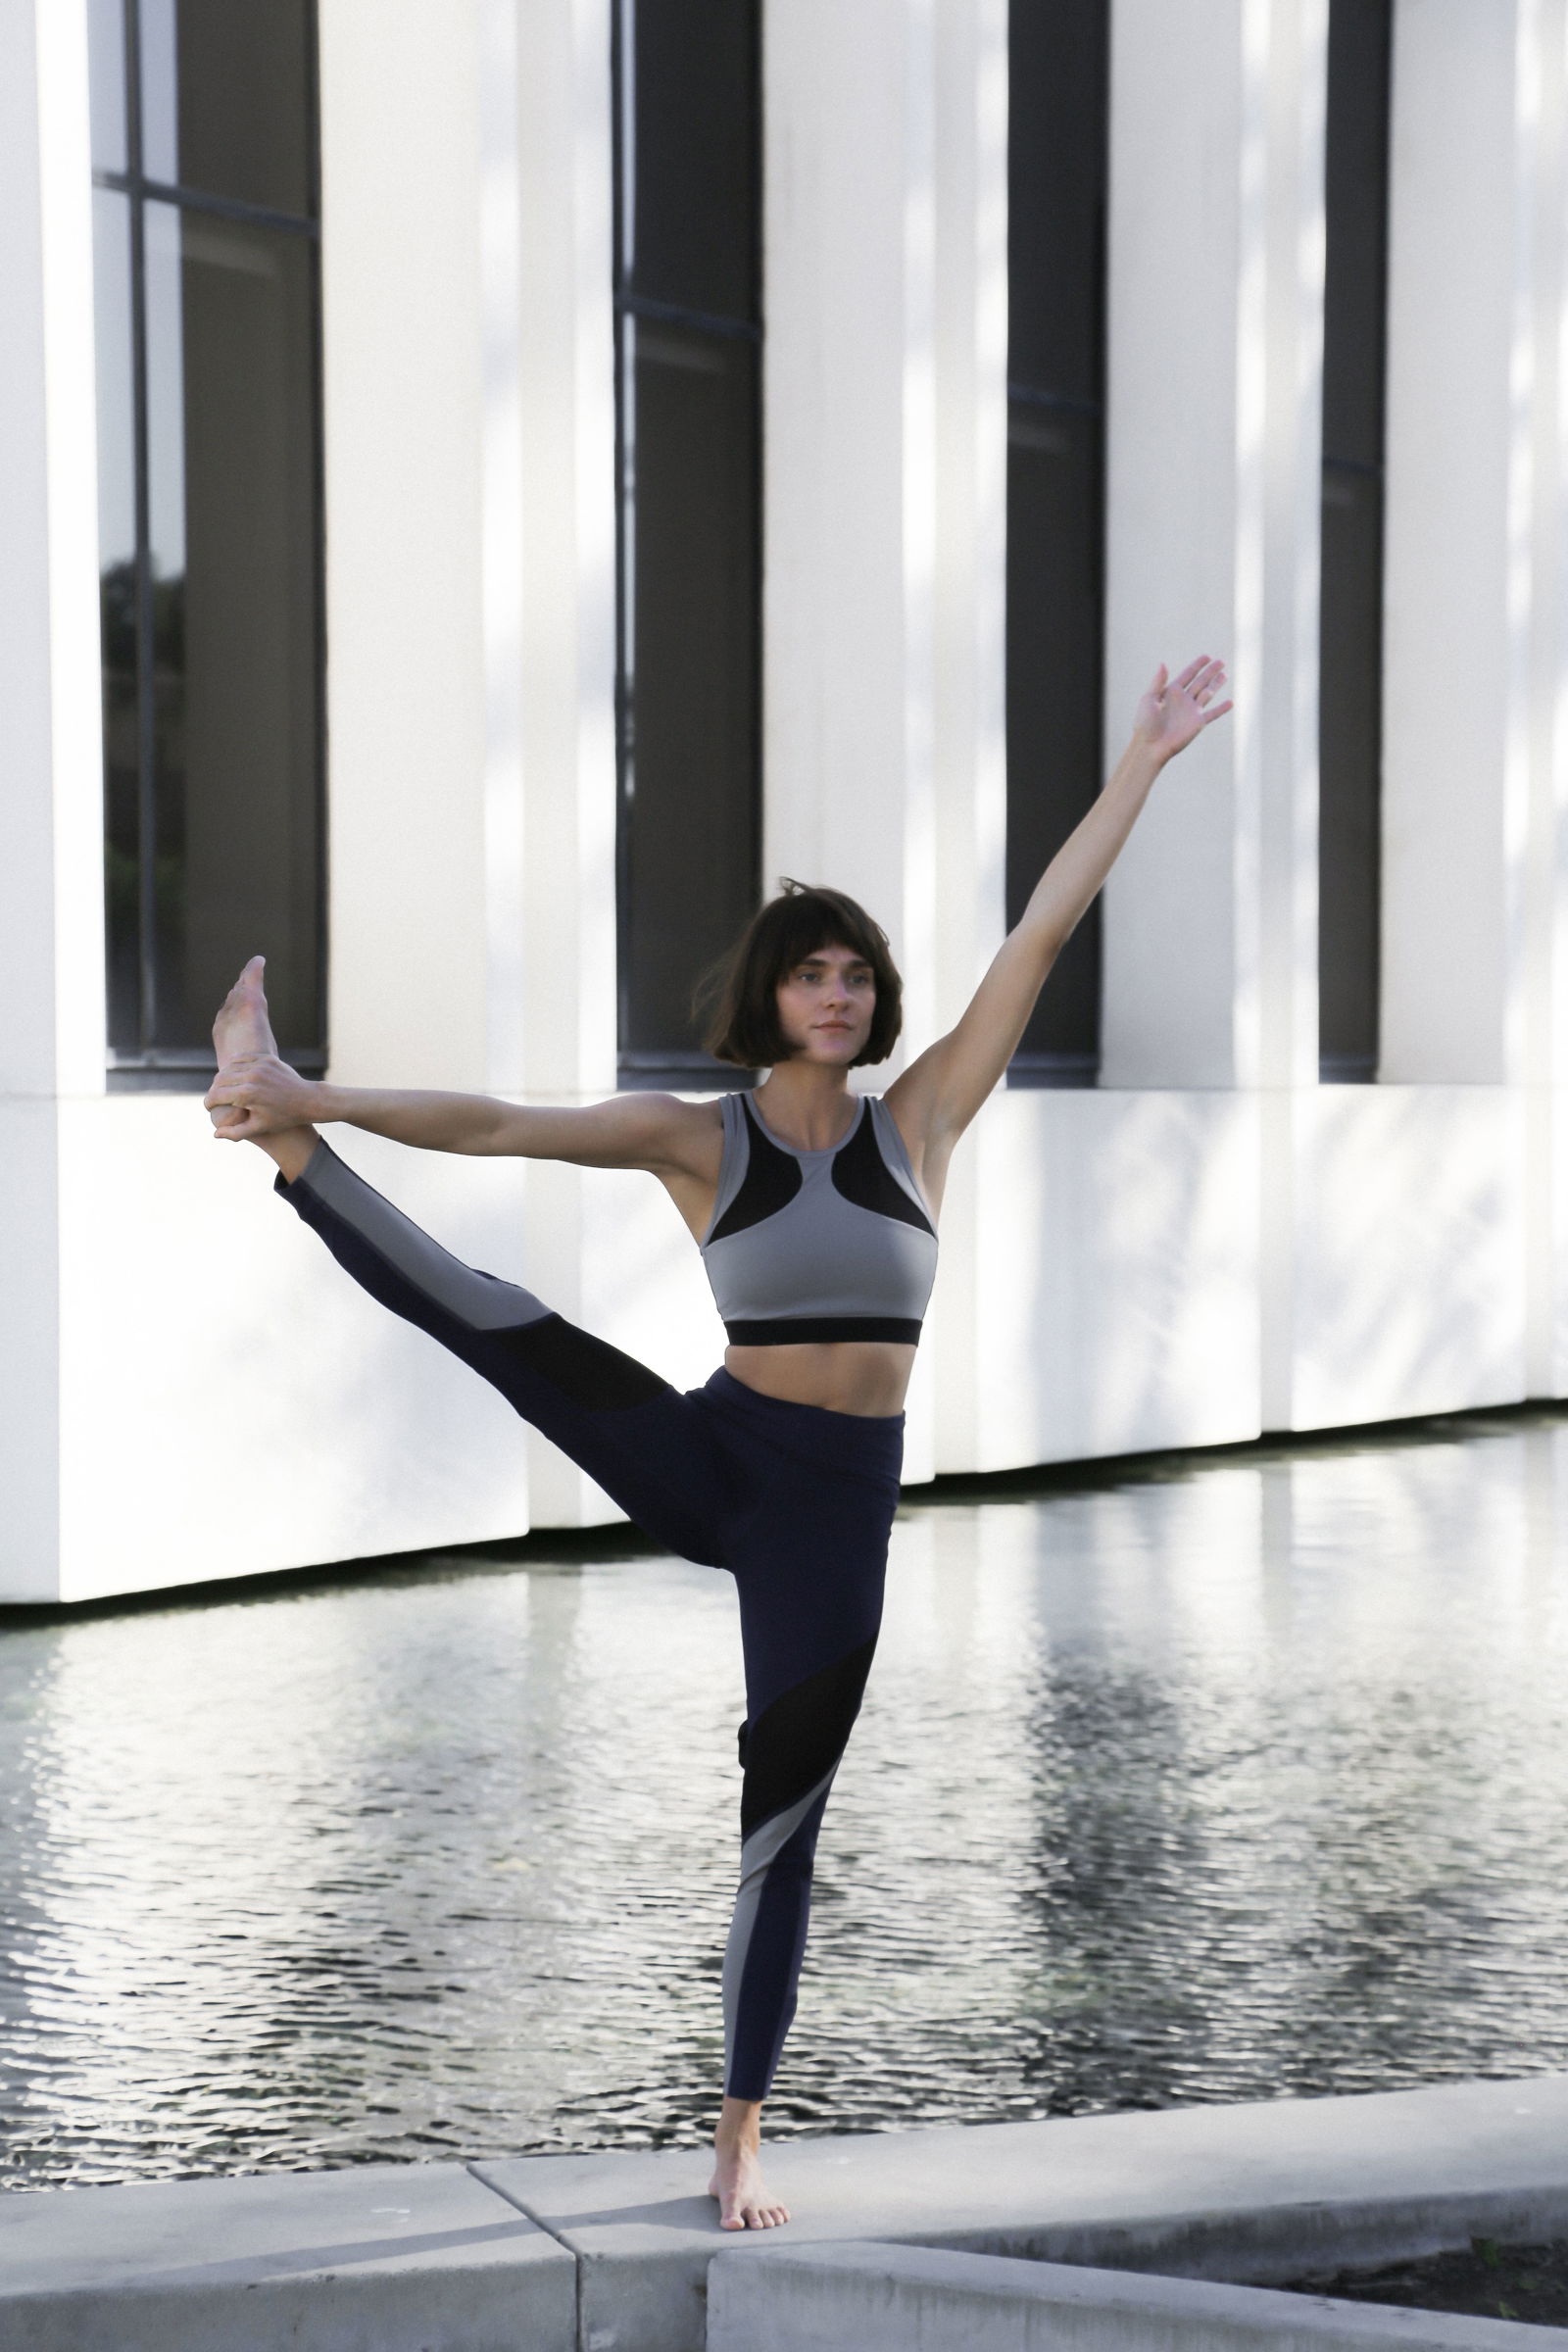 Nadi X - Smart Yoga Pants that Guide Your Form by Wearable X